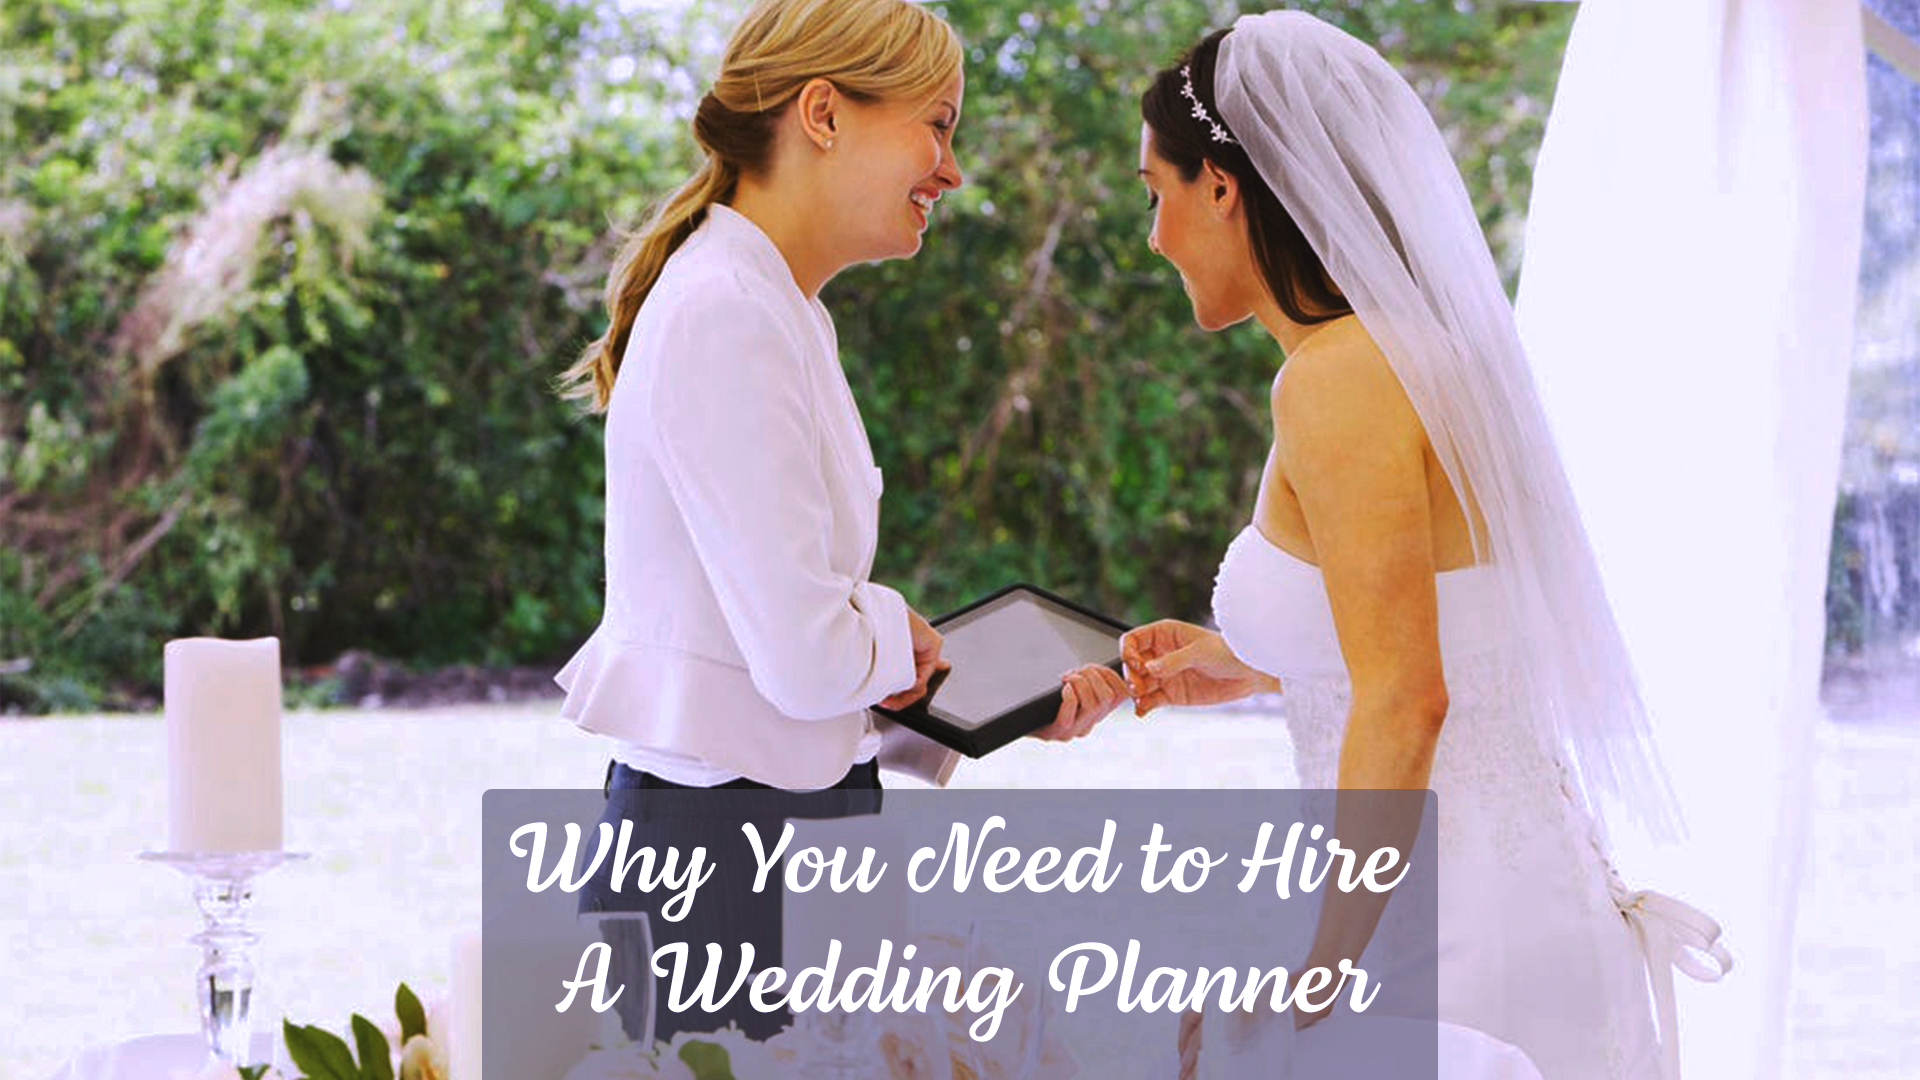 Why You Need To Hire a Wedding Planner in South Florida